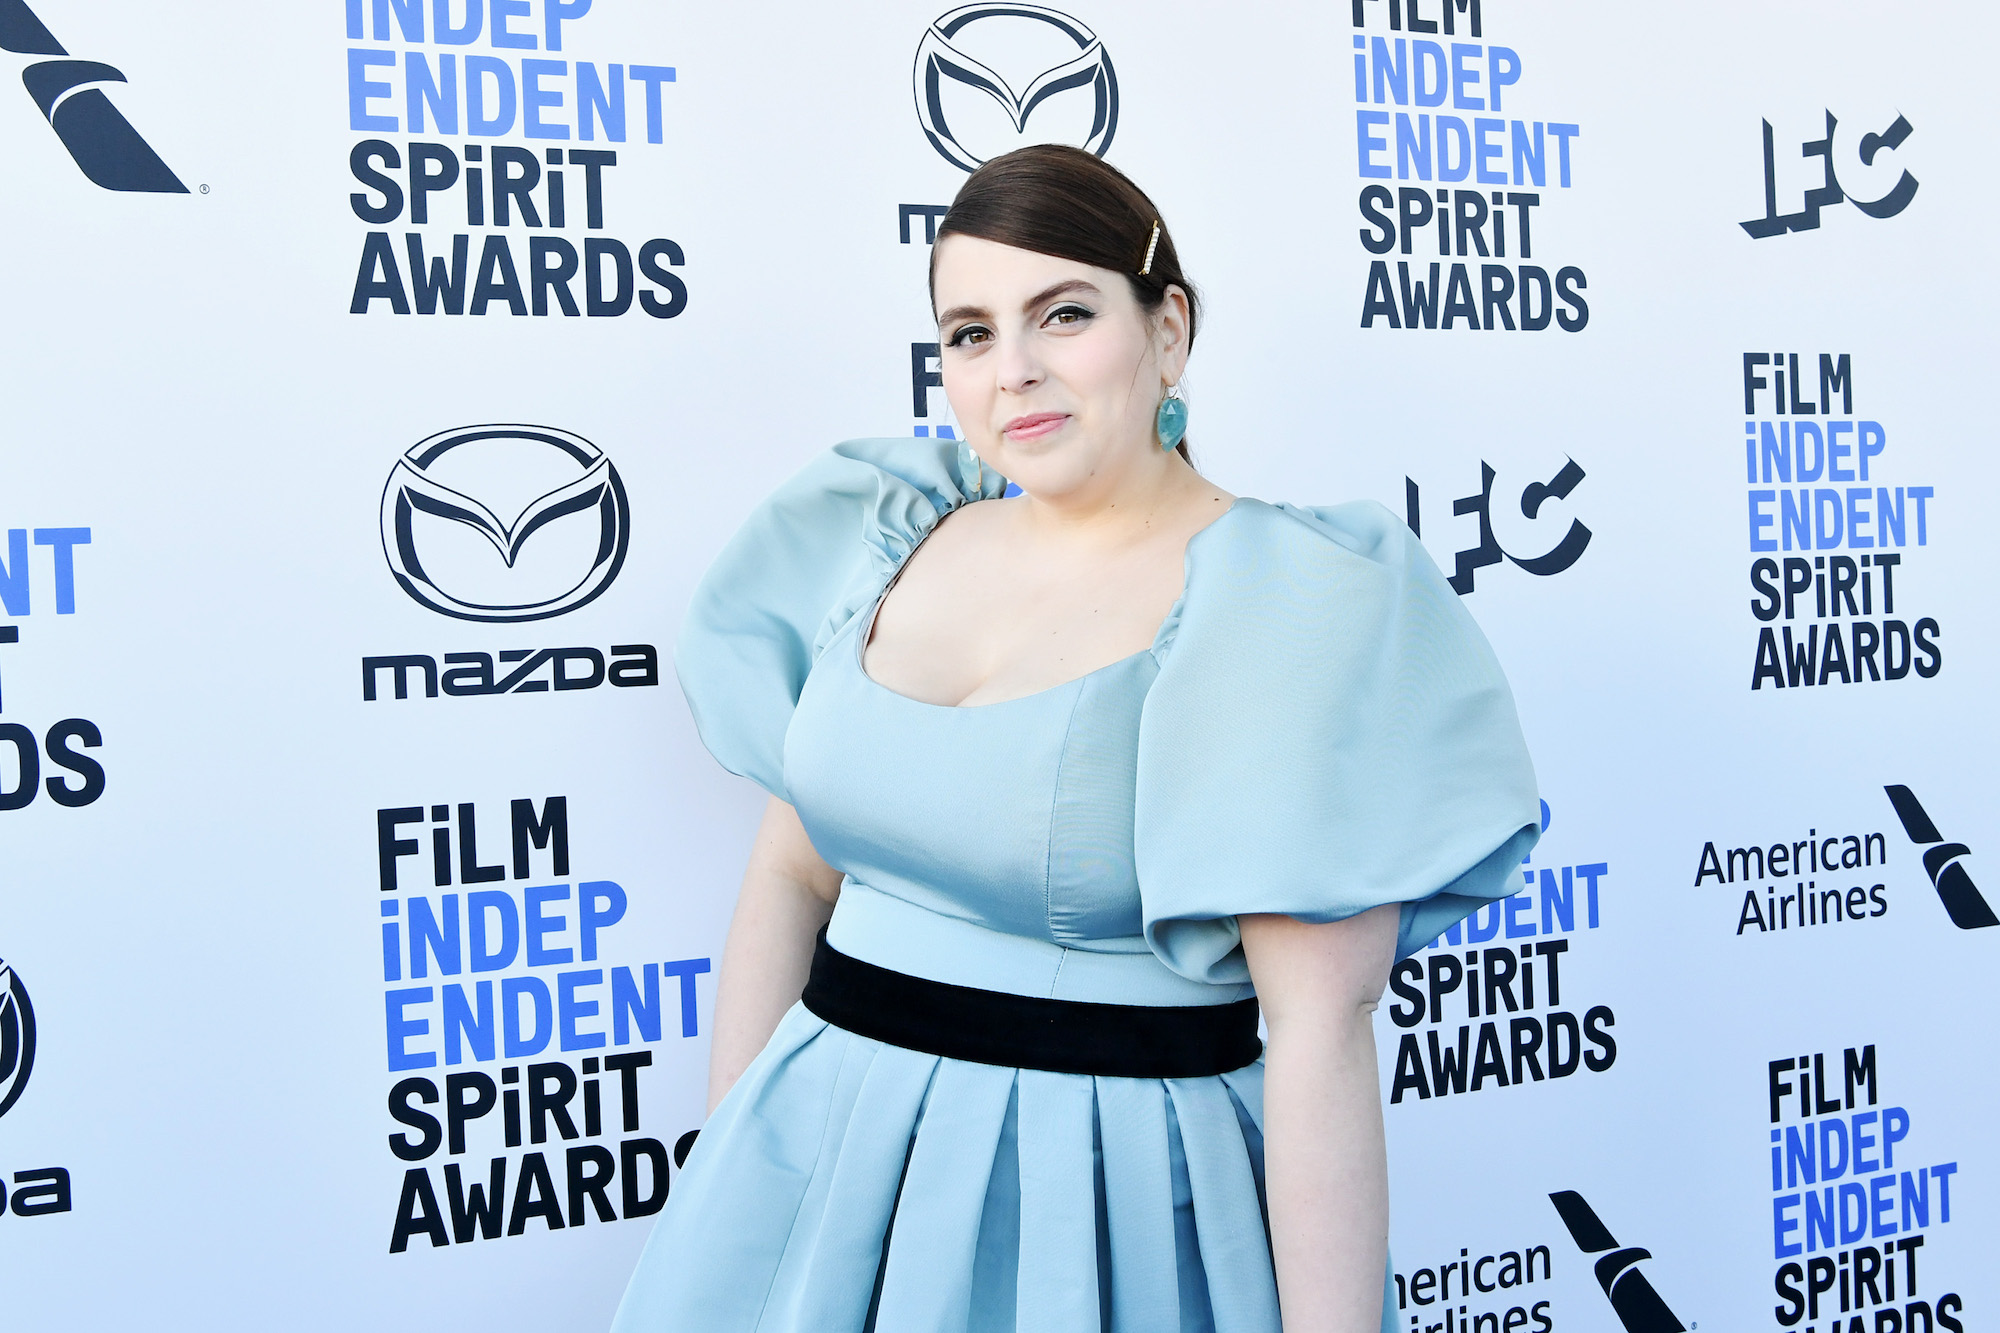 Beanie Feldstein smiling in front of a white and blue background